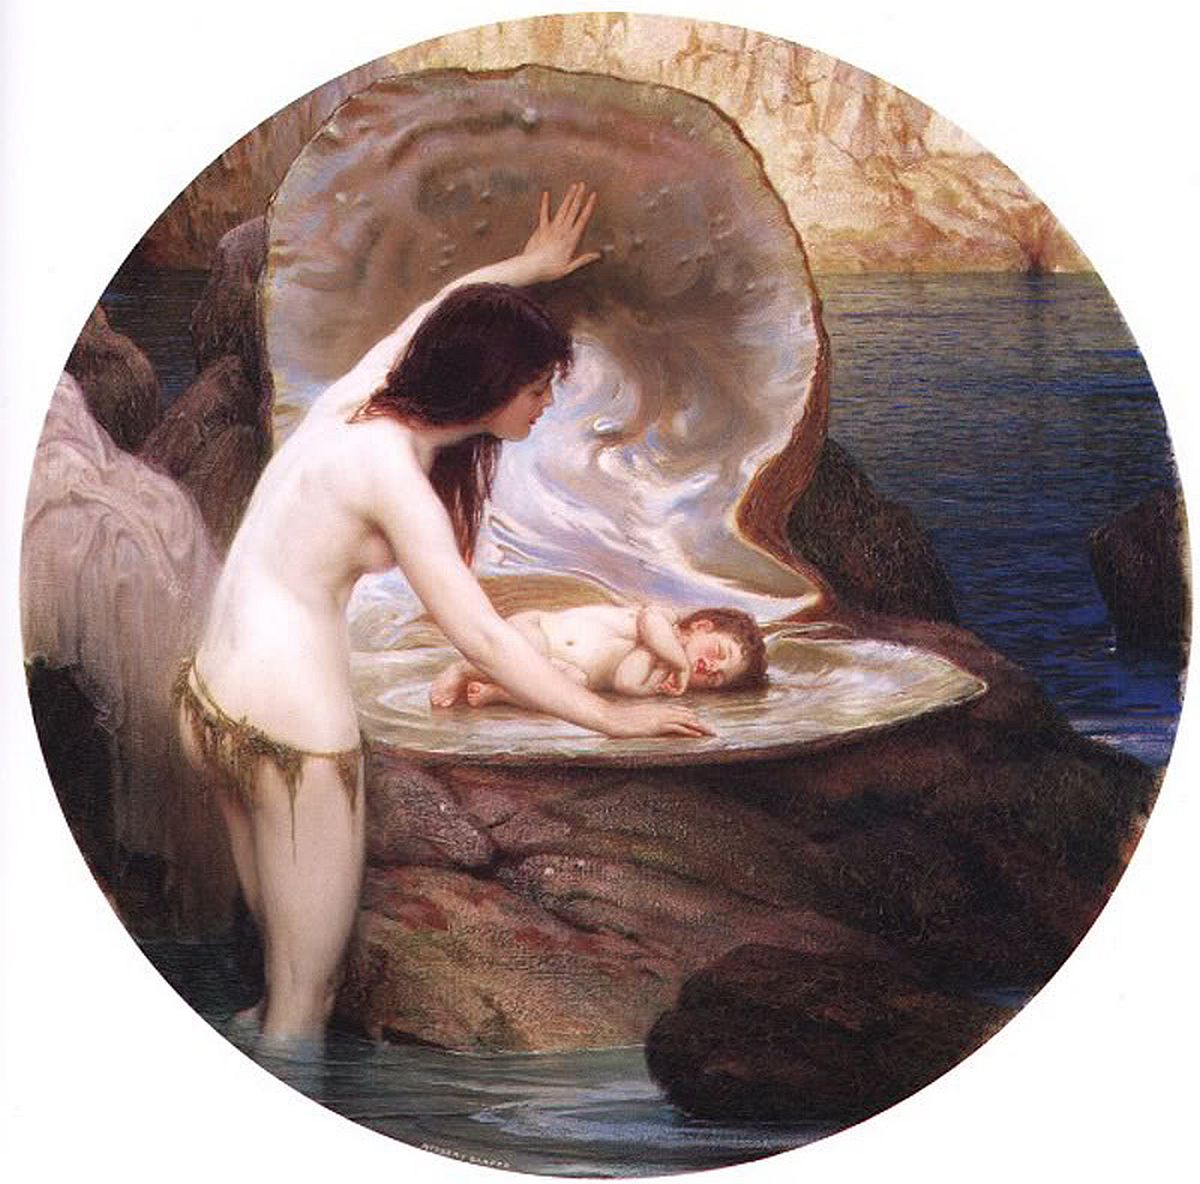 A Water Baby (c. 1900) by Herbert James Draper (English, 1864-1920). There are water babies in the folklore of some Native American tribes, inc. that the cry of a water baby is an omen of death / picking it up results in catastrophe. #WaterBabies #FolkloreThursday